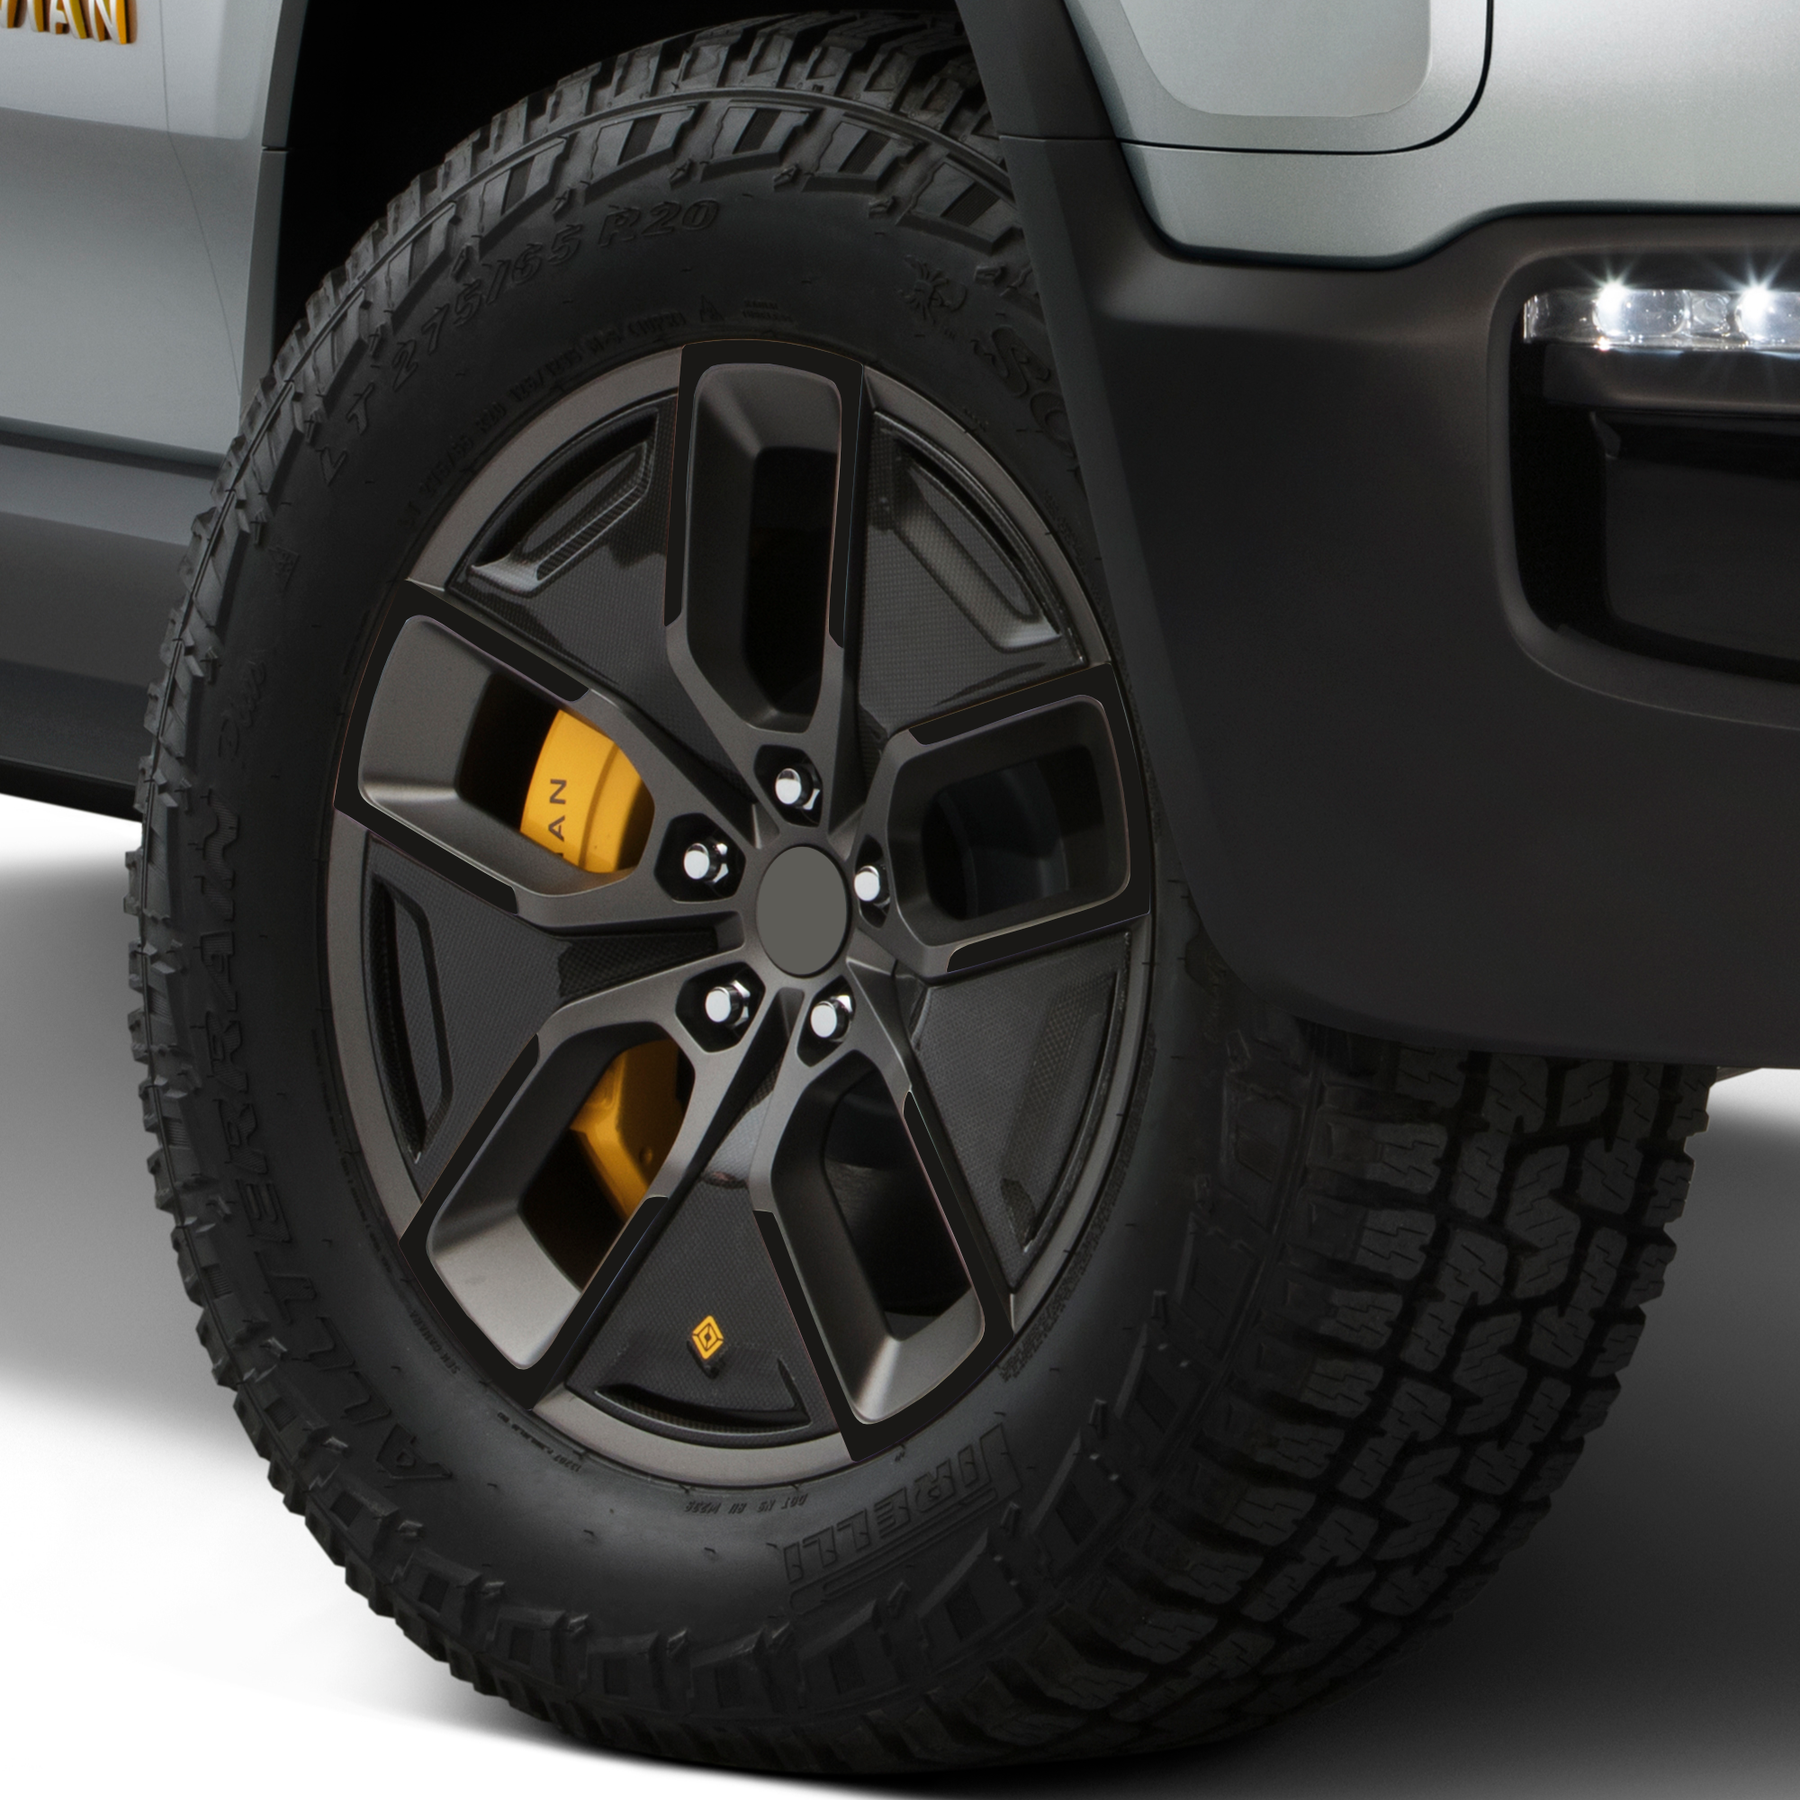 Satin black Spoke decals for the Rivian 20" Wheels